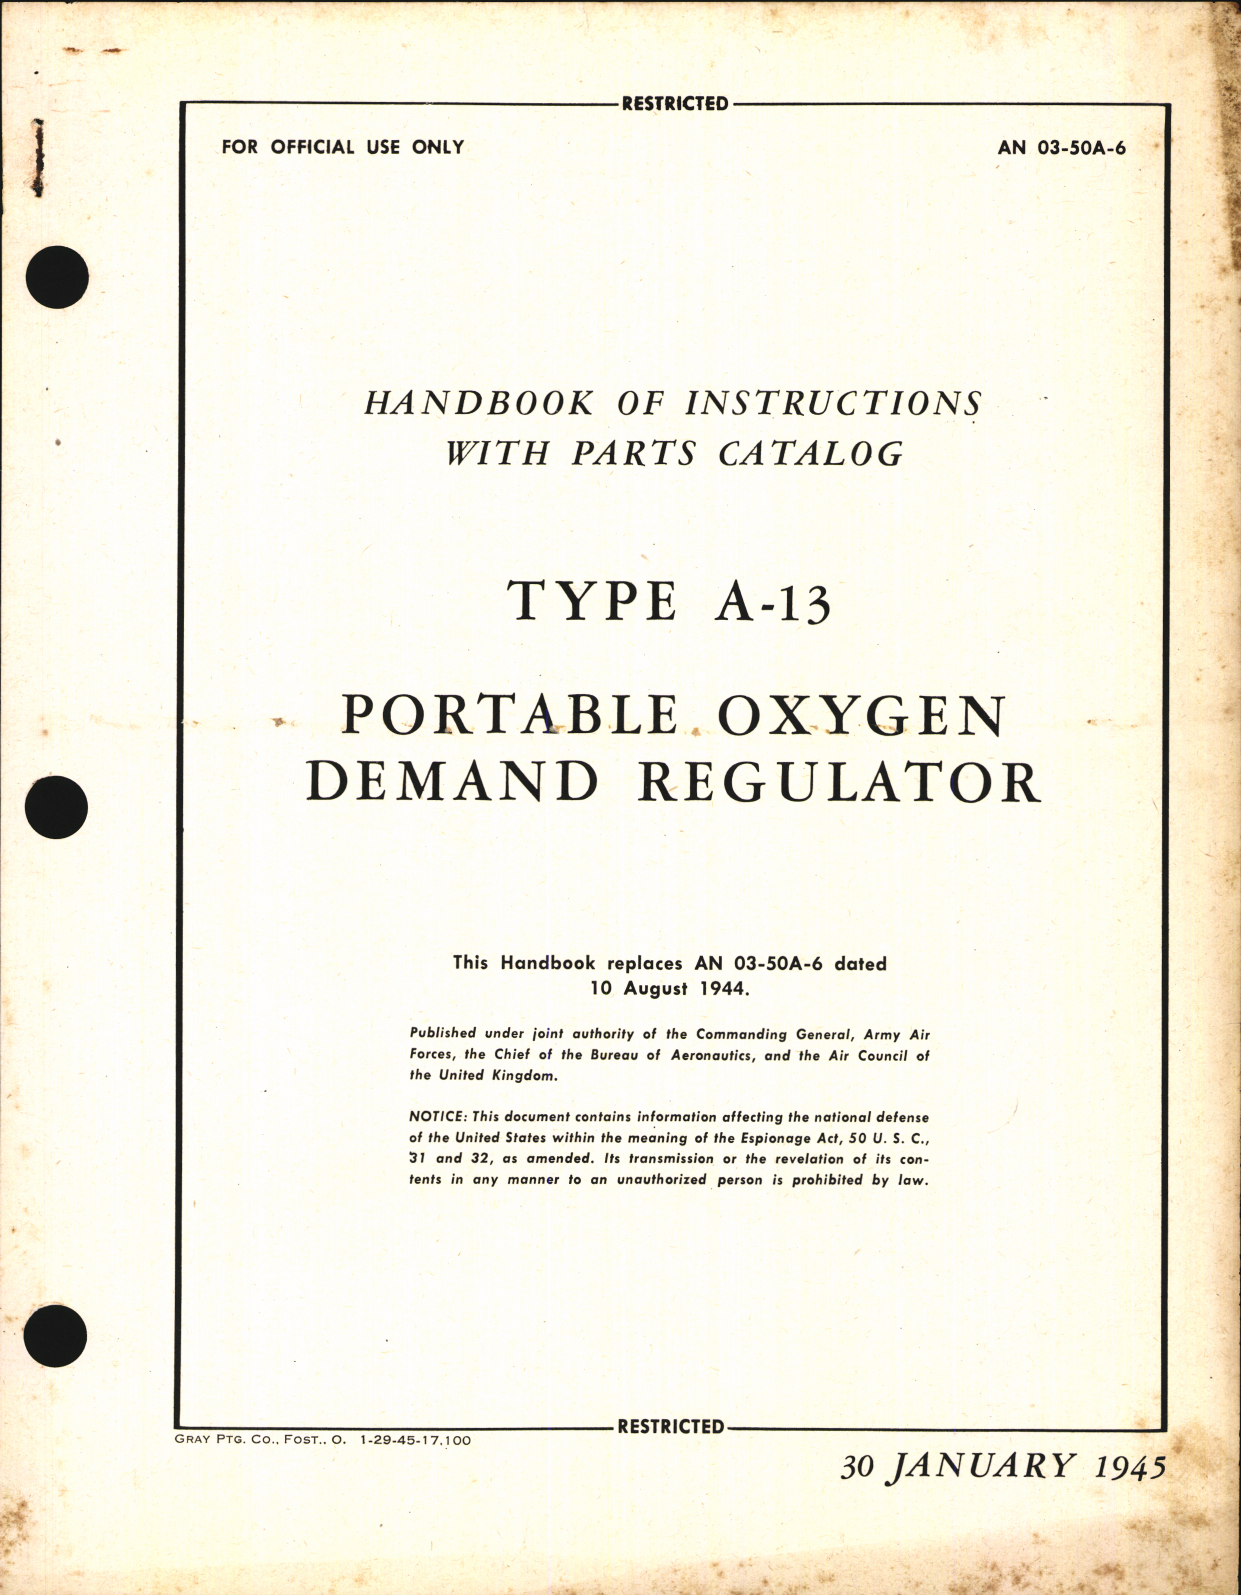 Sample page 1 from AirCorps Library document: Handbook of Instructions with Parts Catalog for Type A-13 Portable Oxygen Demand Regulator